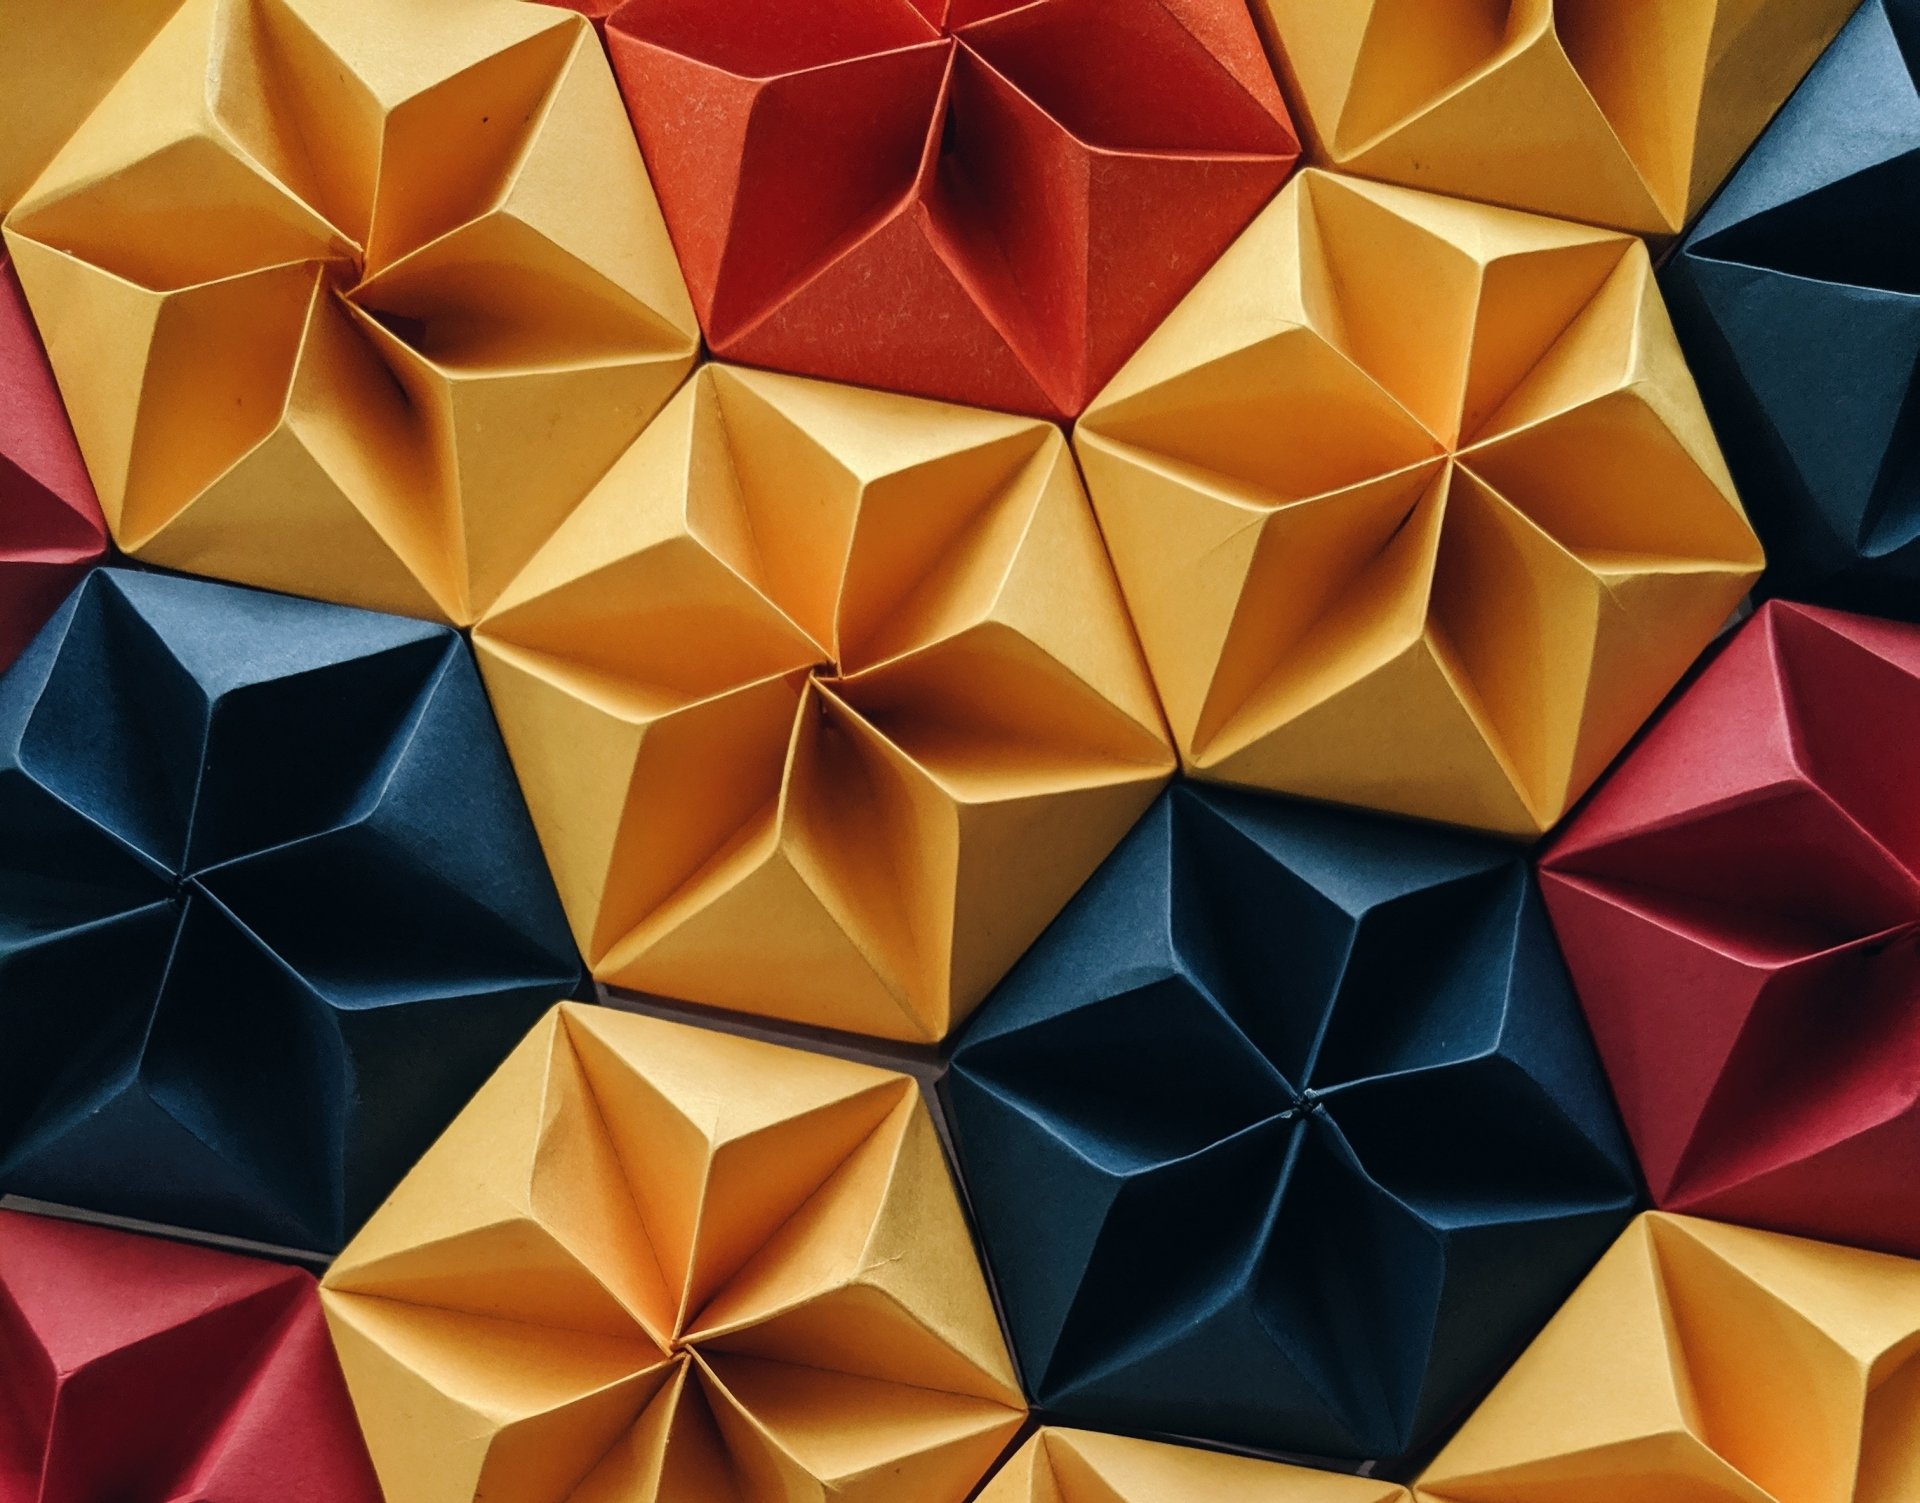 Man Made Origami HD Wallpaper by Faris Mohammed